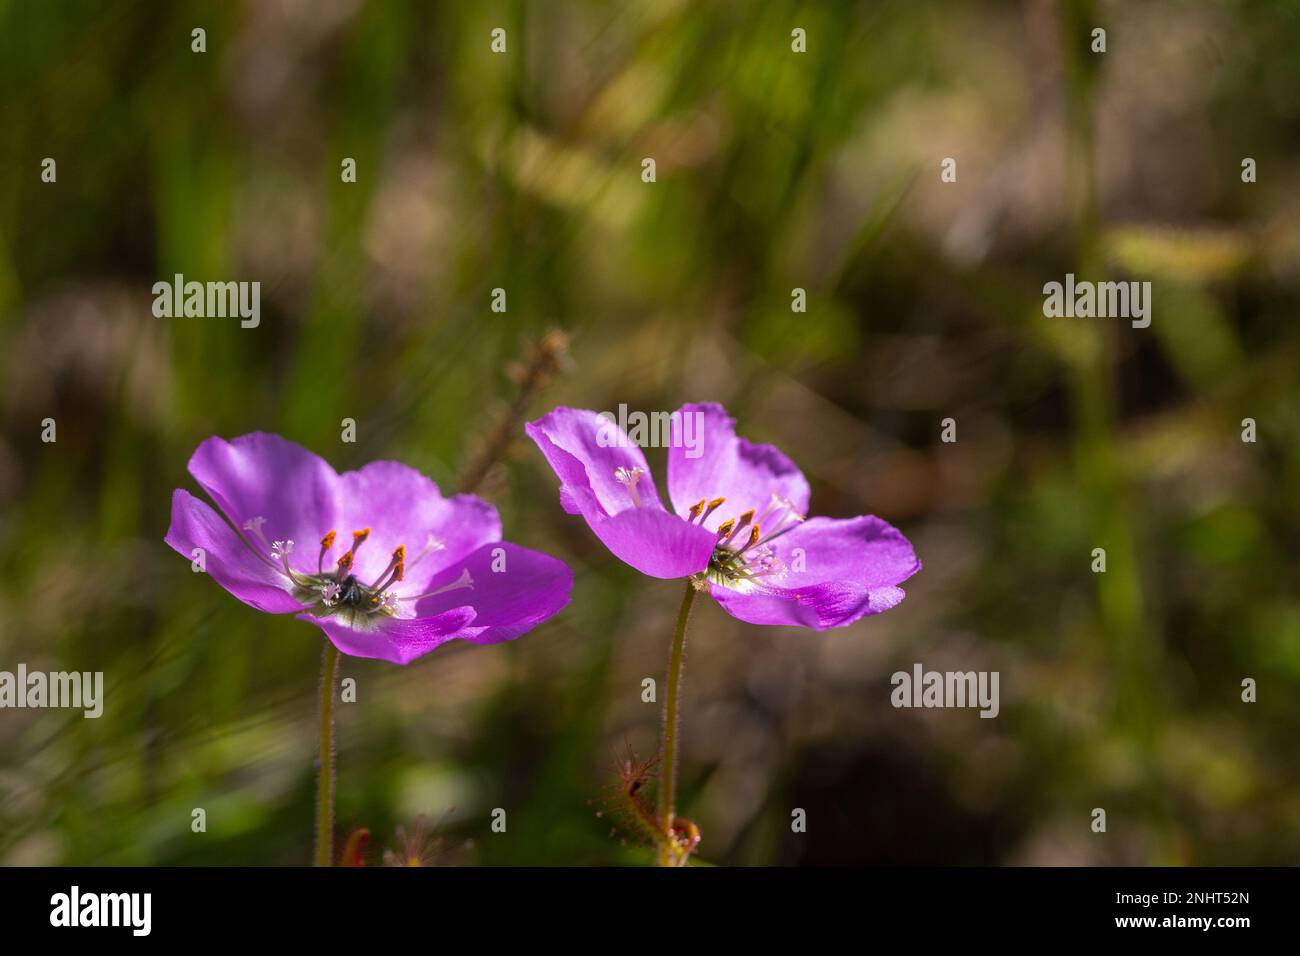 two pink flowers of Drosera cistiflora, a carnivorous plant, with blurry background and copyspace Stock Photo